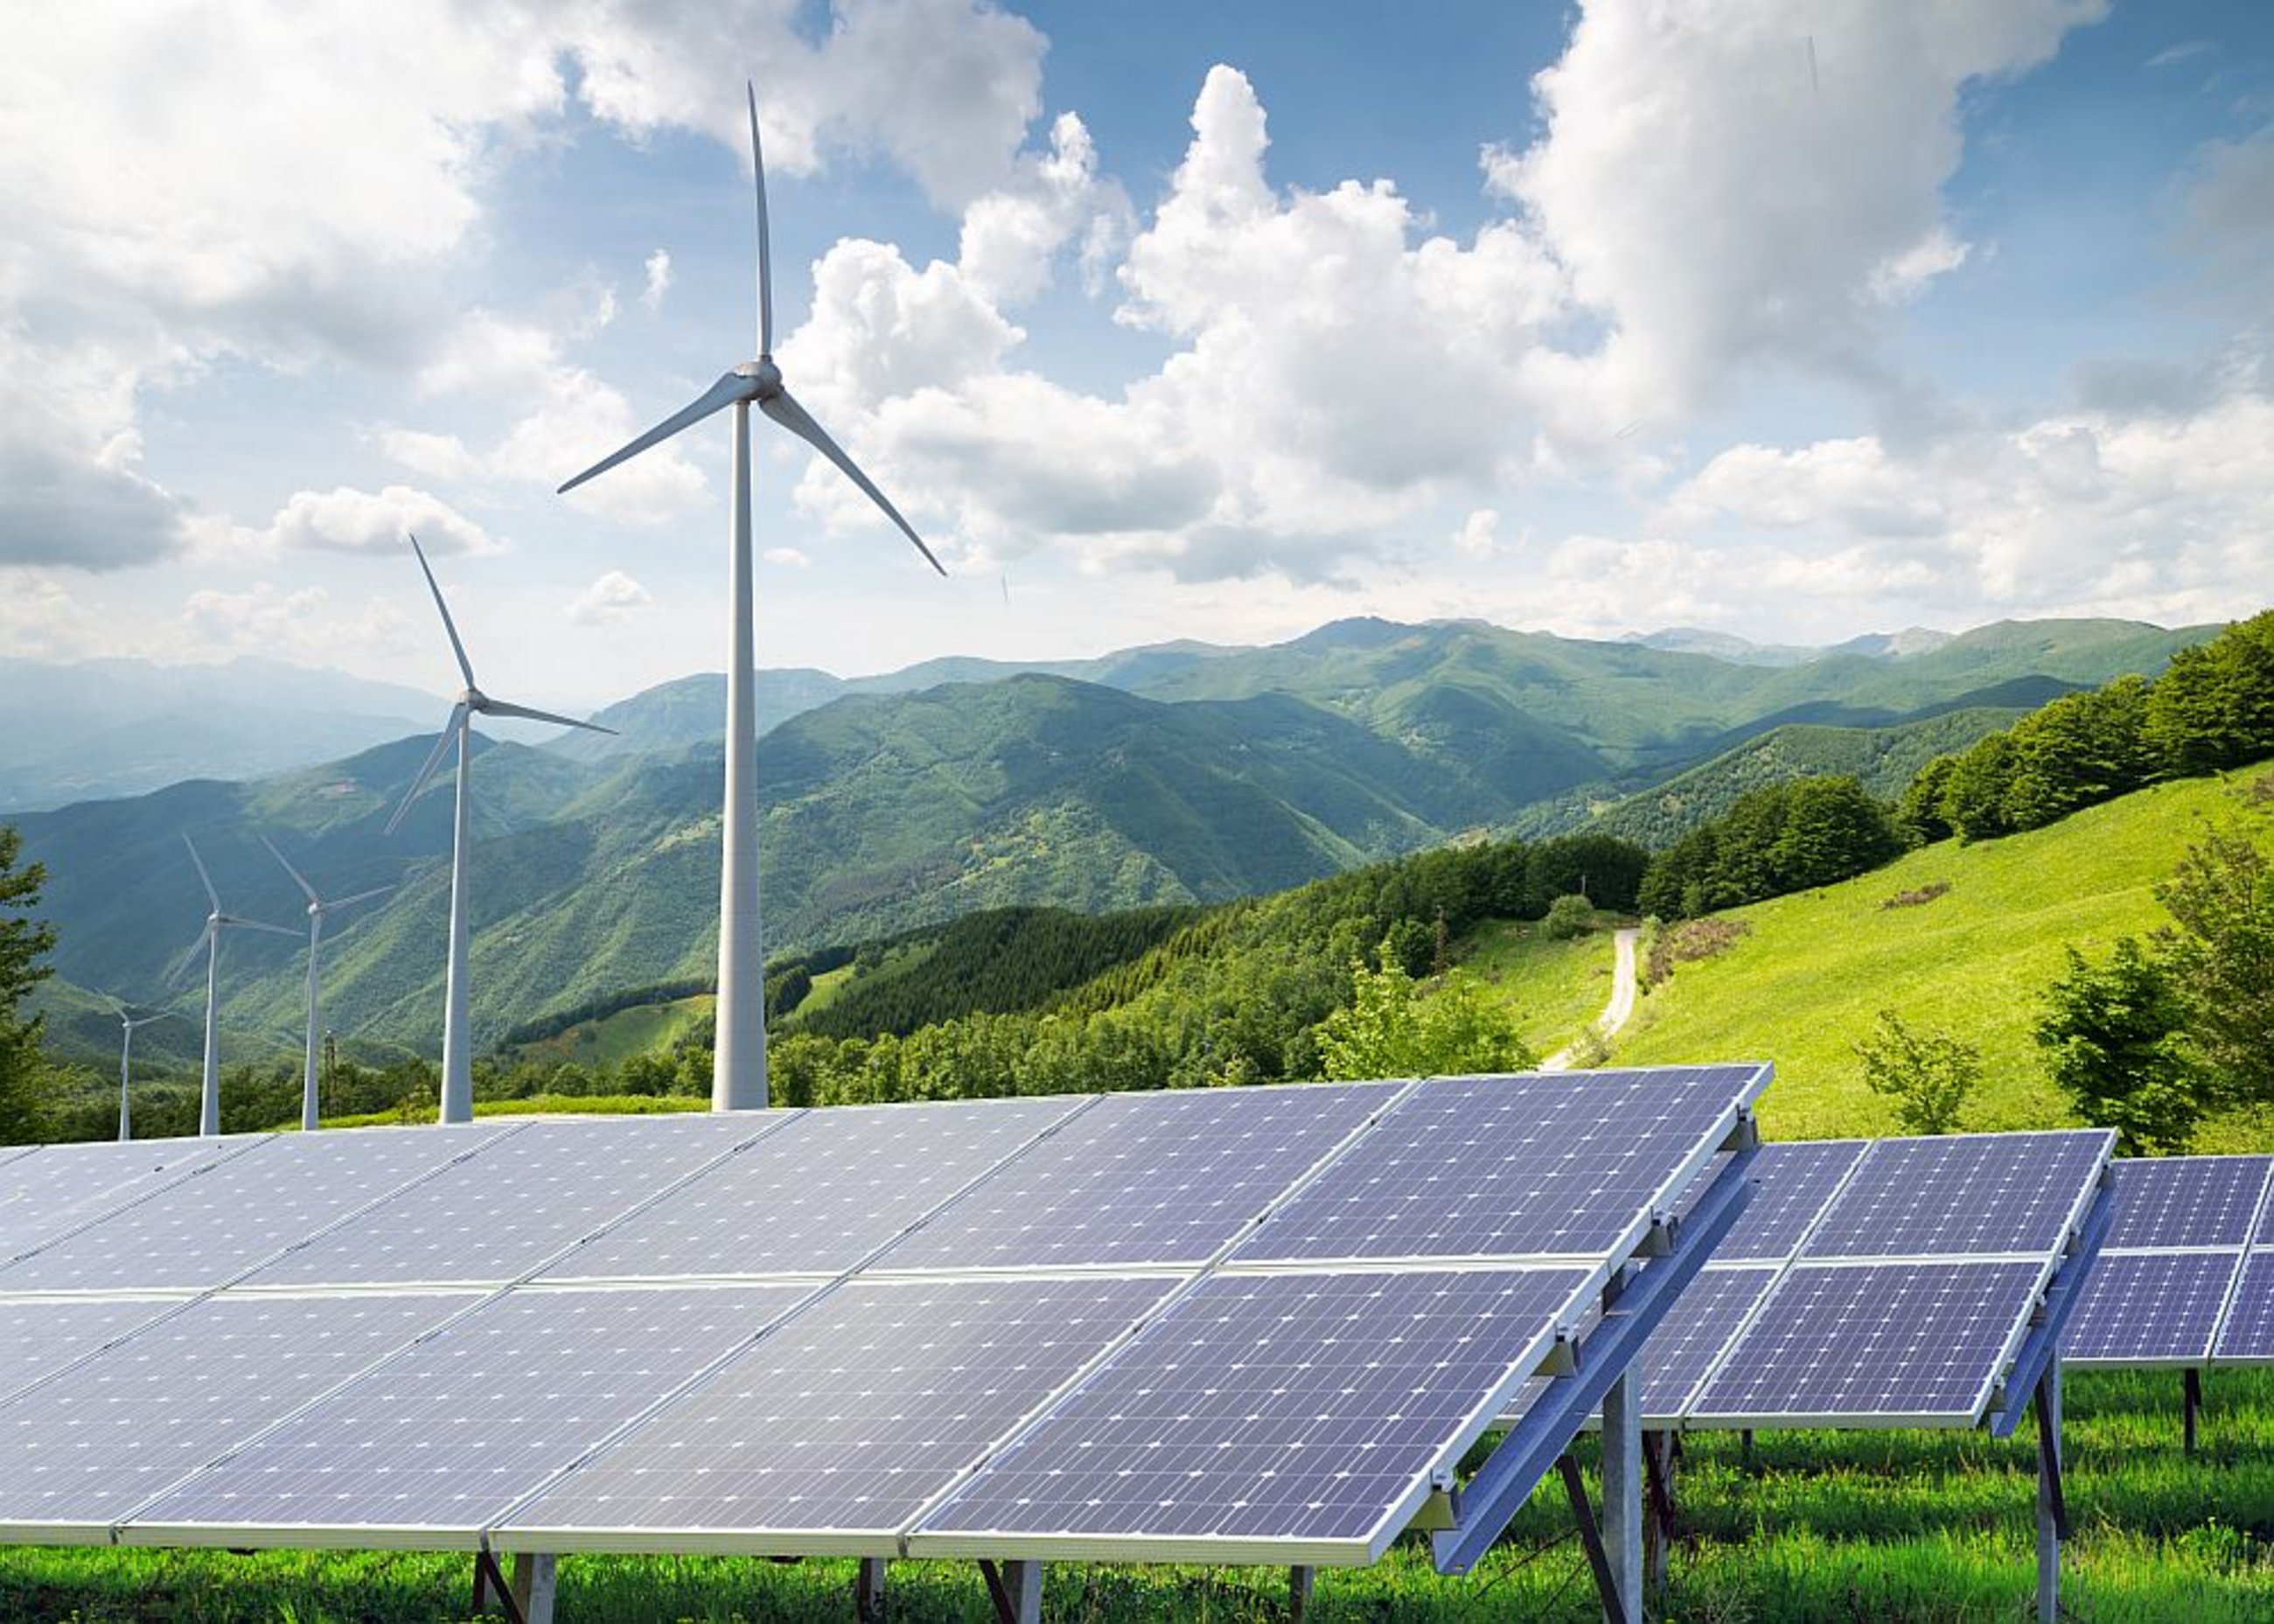 Fit for 55: Renewable Energies (cepPolicyBrief)